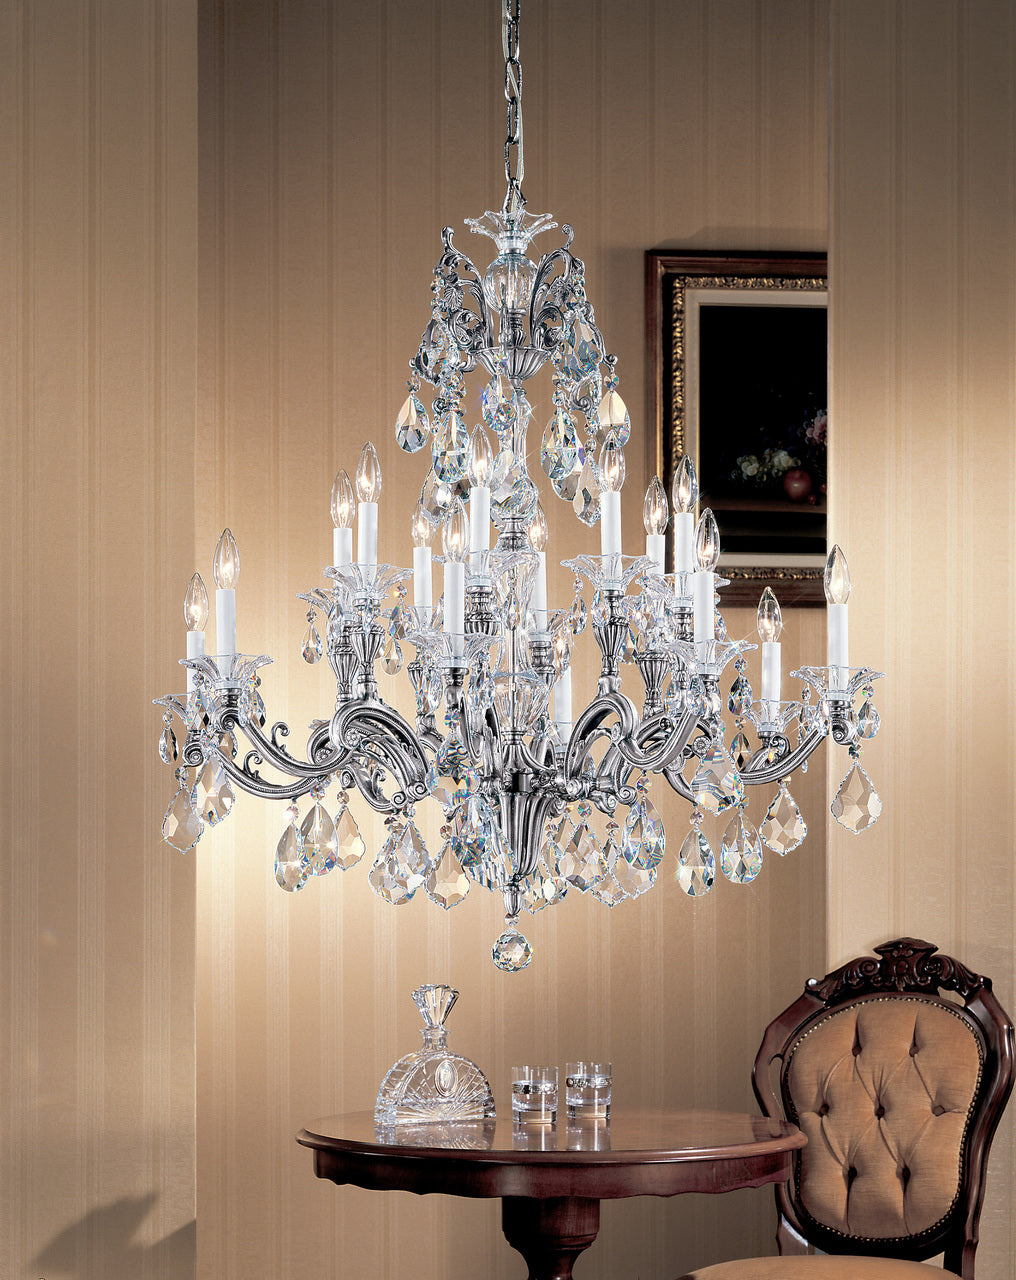 Classic Lighting 57116 RB S Via Firenze Crystal Chandelier in Roman Bronze (Imported from Spain)